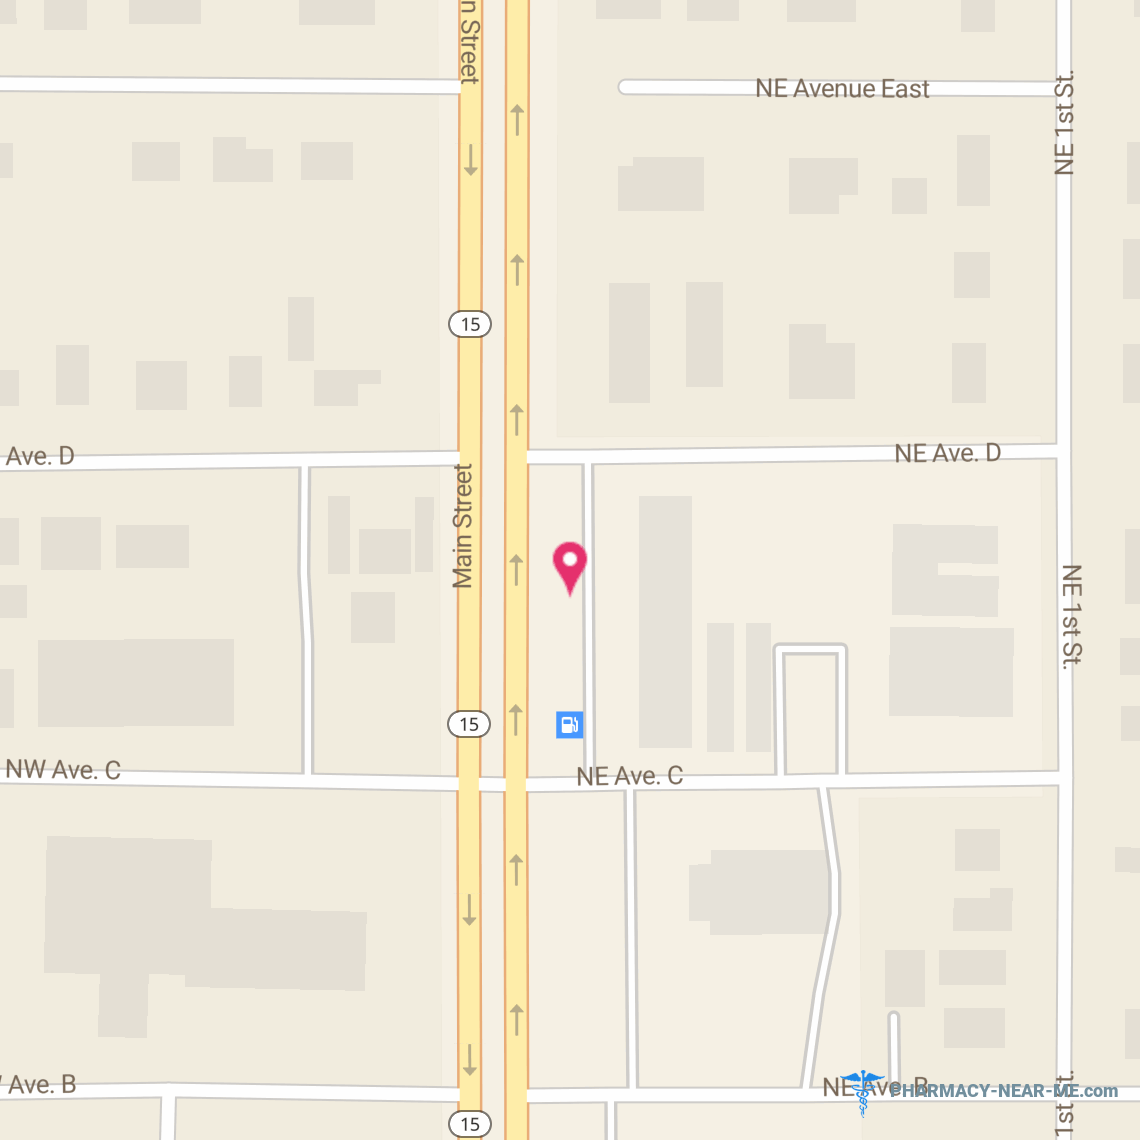 K&M DRUGS - Pharmacy Hours, Phone, Reviews & Information: 364 South Main Street, Belle Glade, Florida 33430, United States